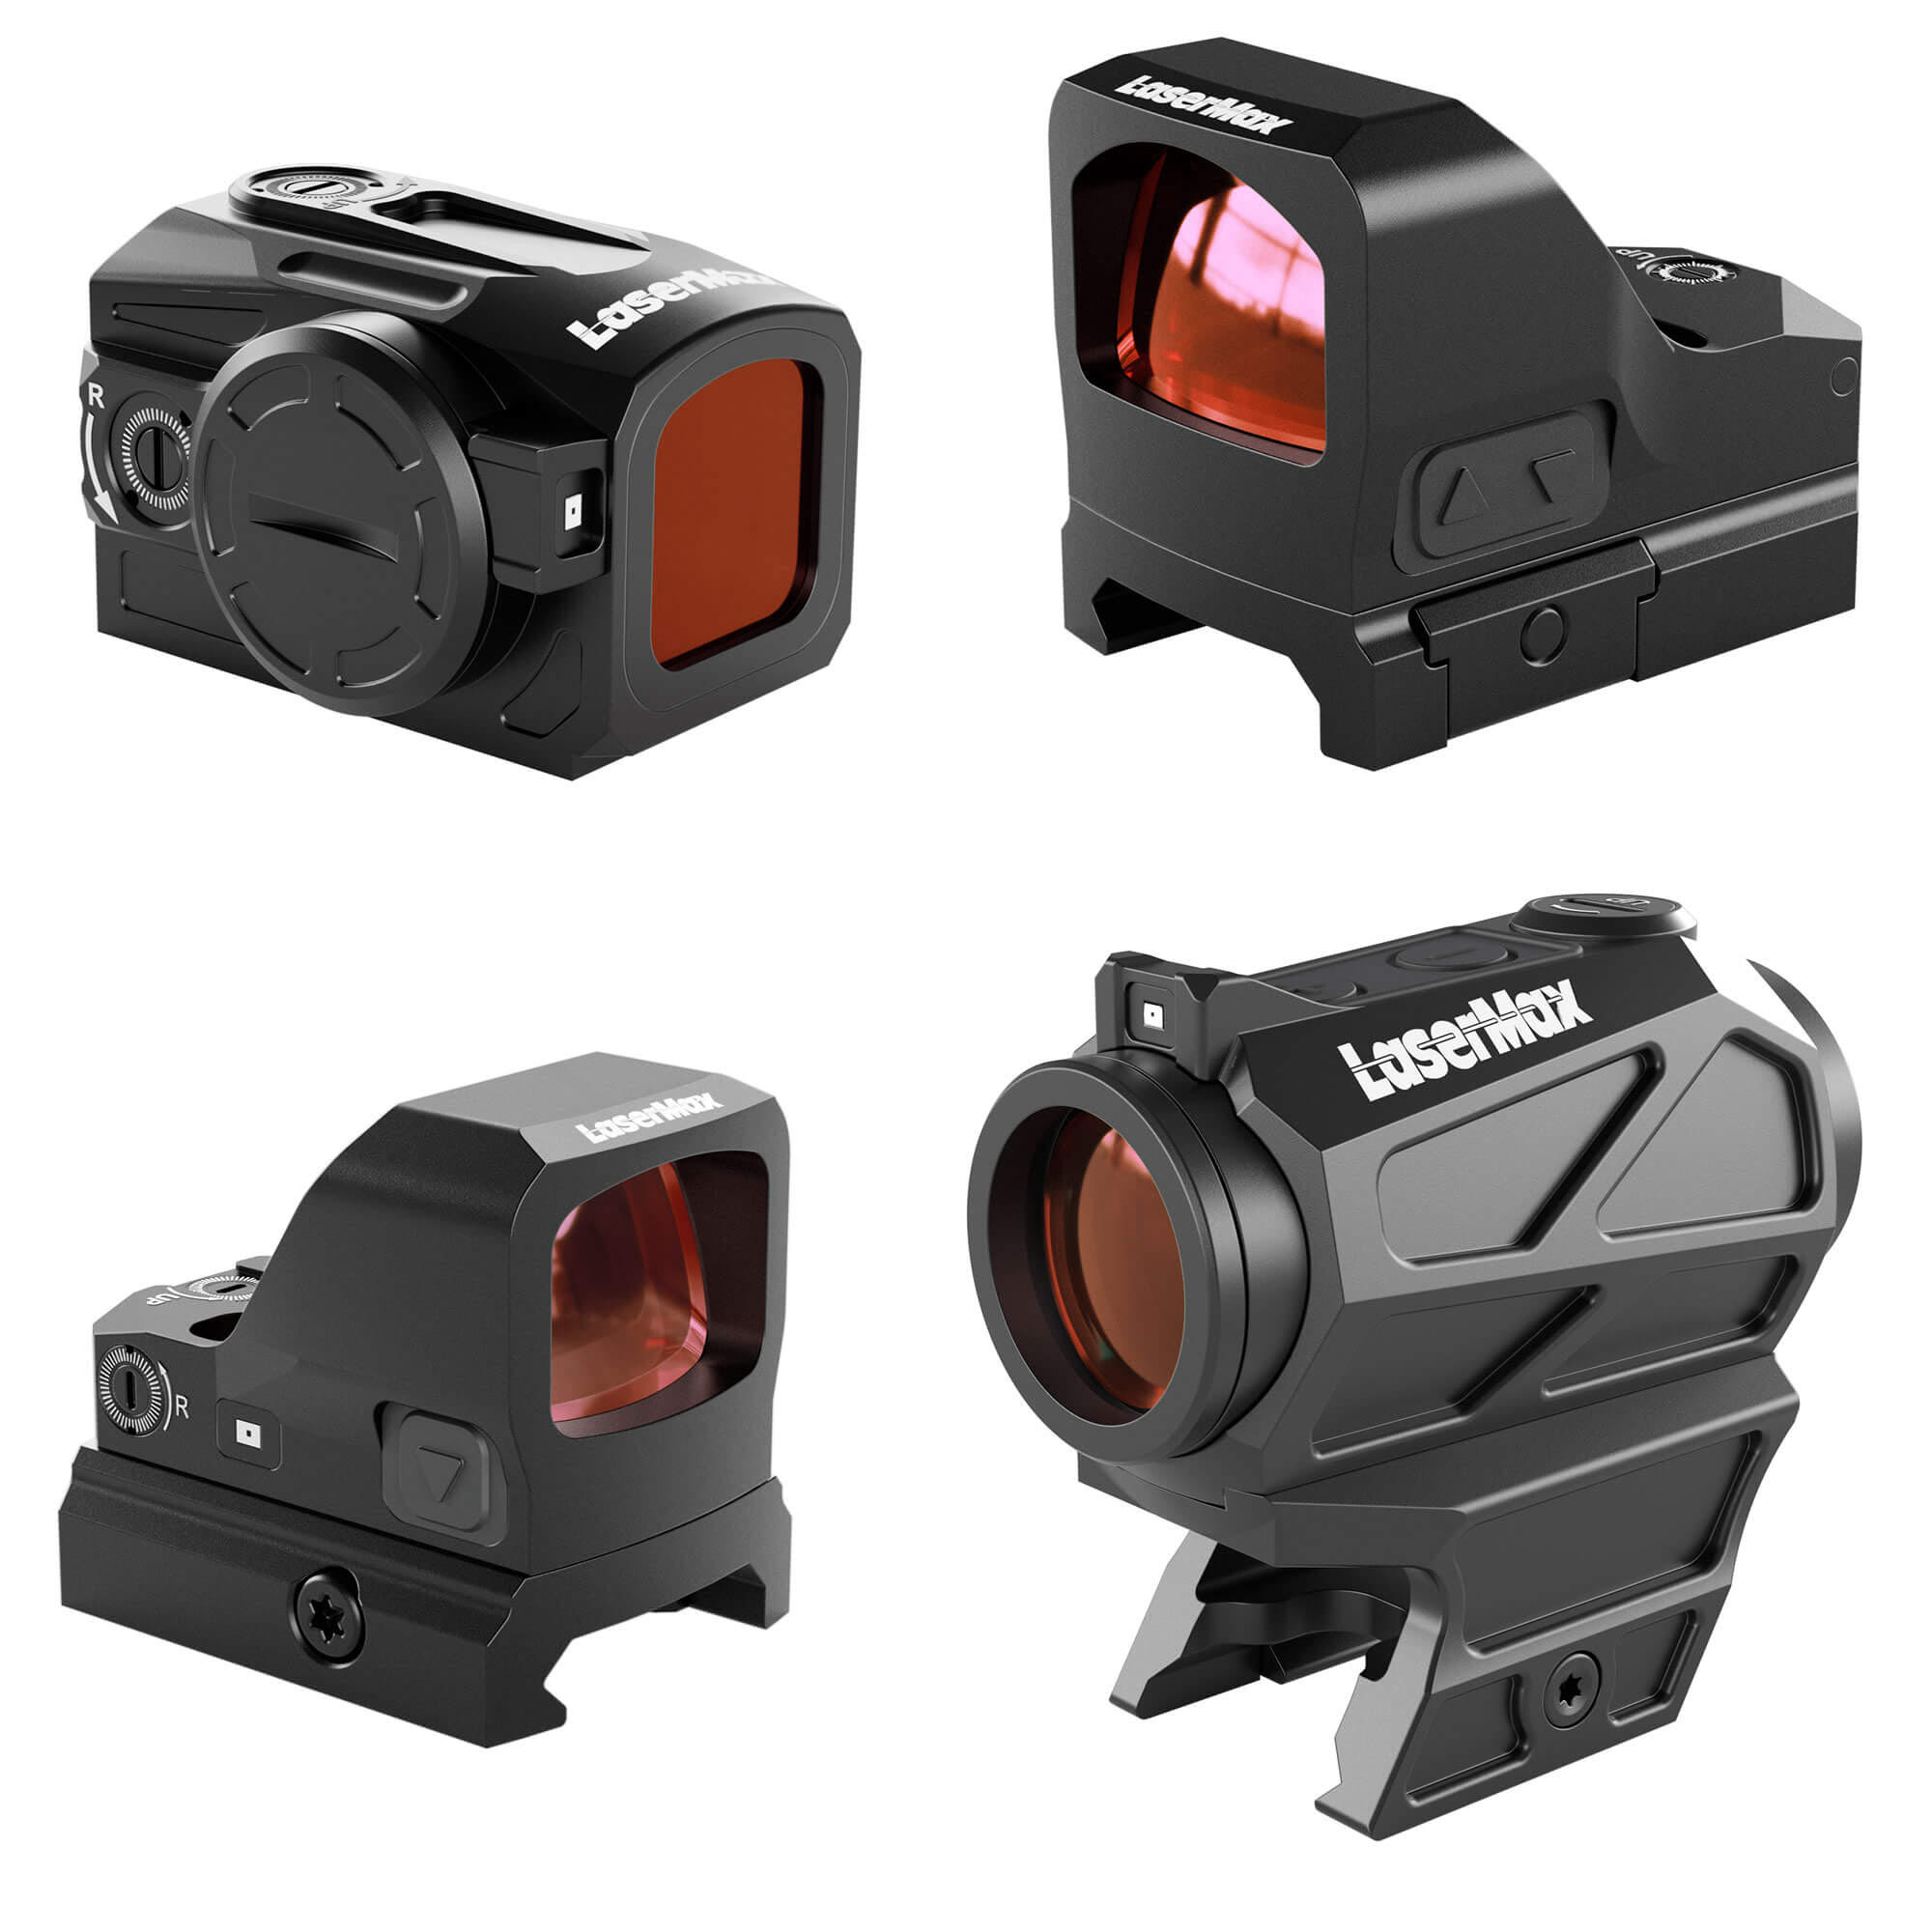 LaserMax Introduces New Line of Advanced Red Dot Sights